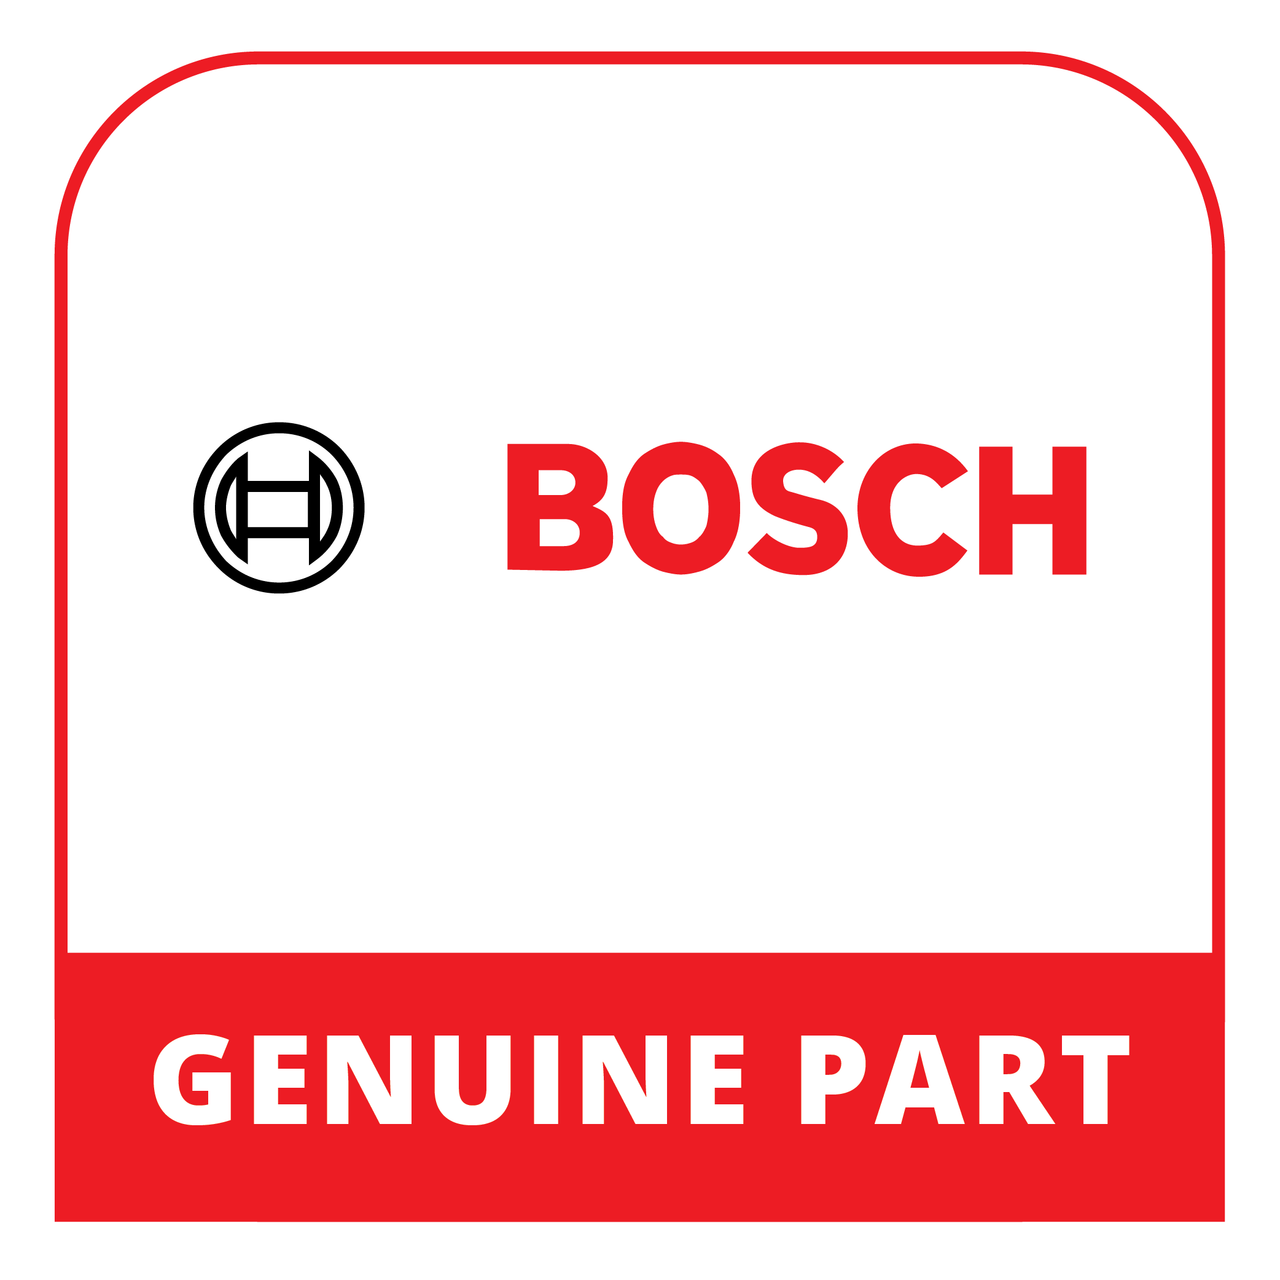 Bosch (Thermador) 18064146 - Instruction Manual - Genuine Bosch (Thermador) Part